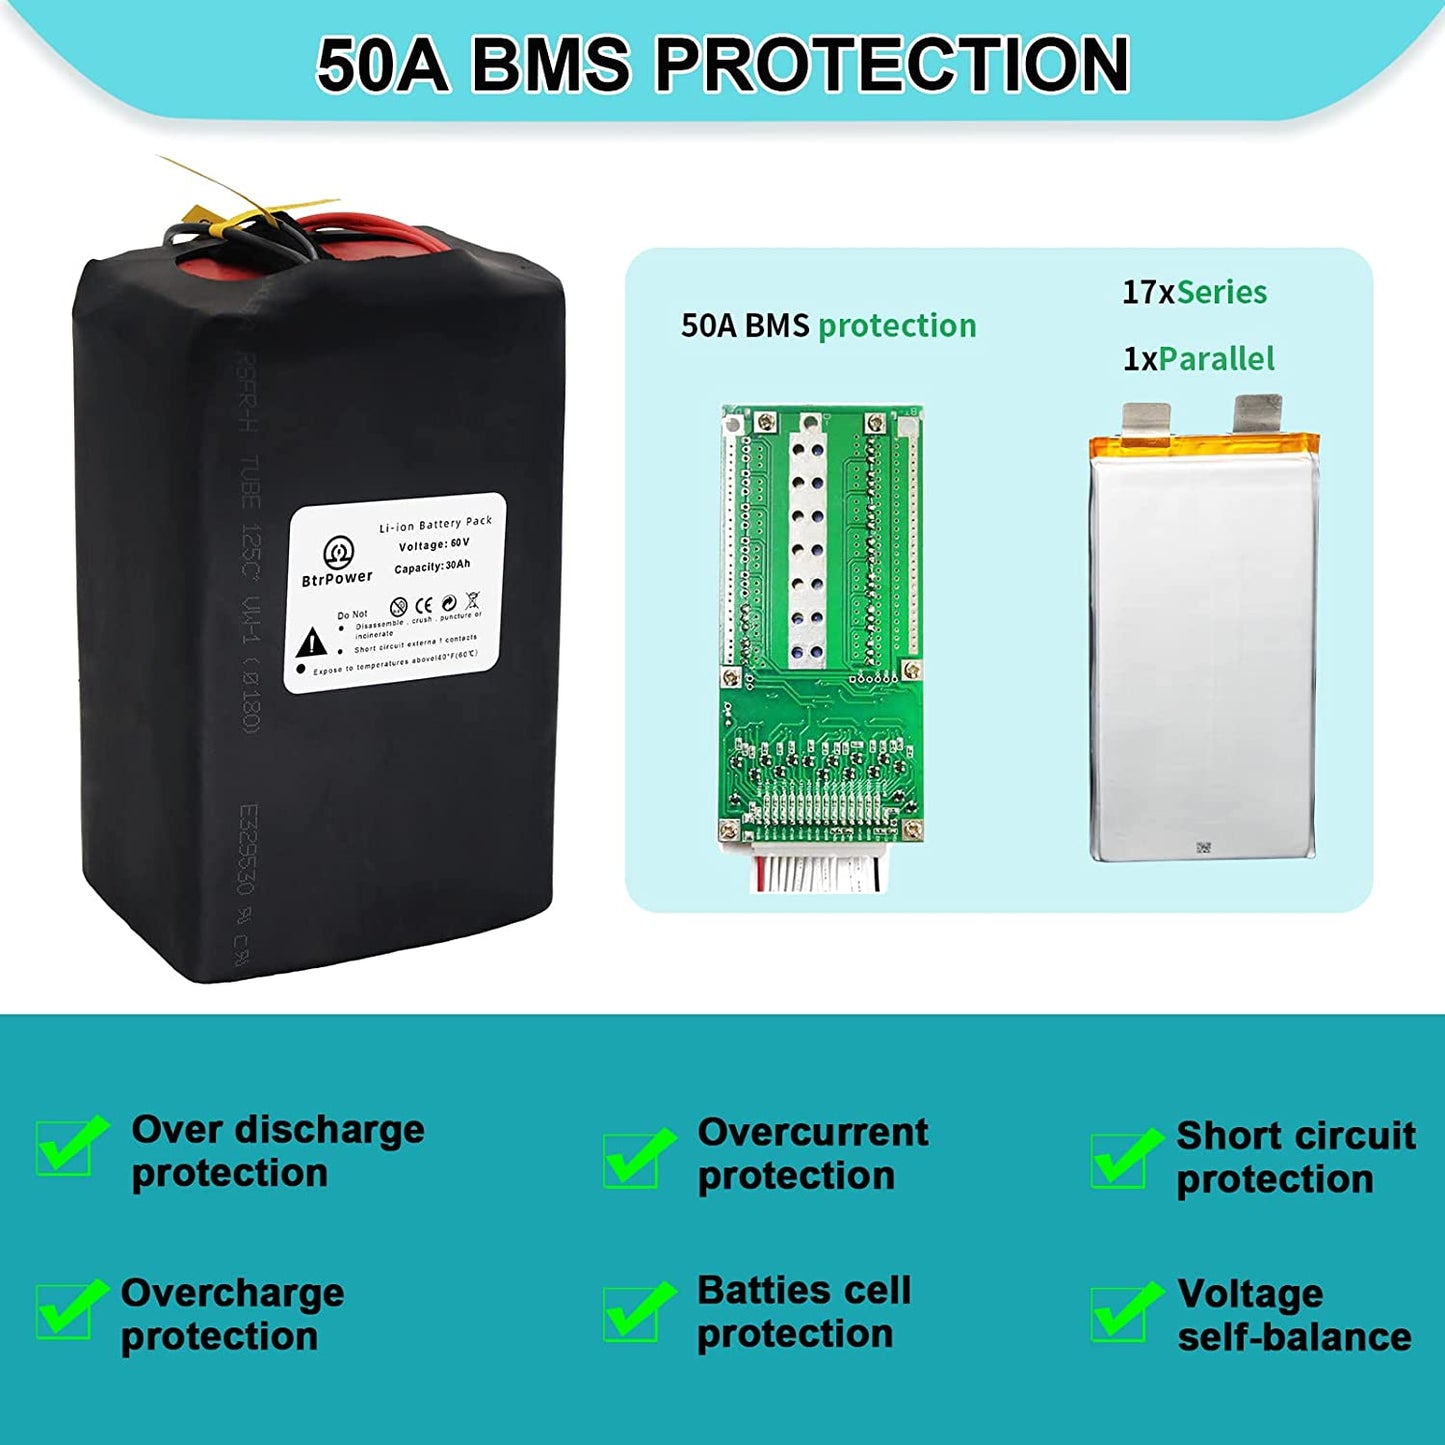 BtrPower EBike Battery 60V 30AH  Li-ion Battery Pack with 5A Charge 50A BMS